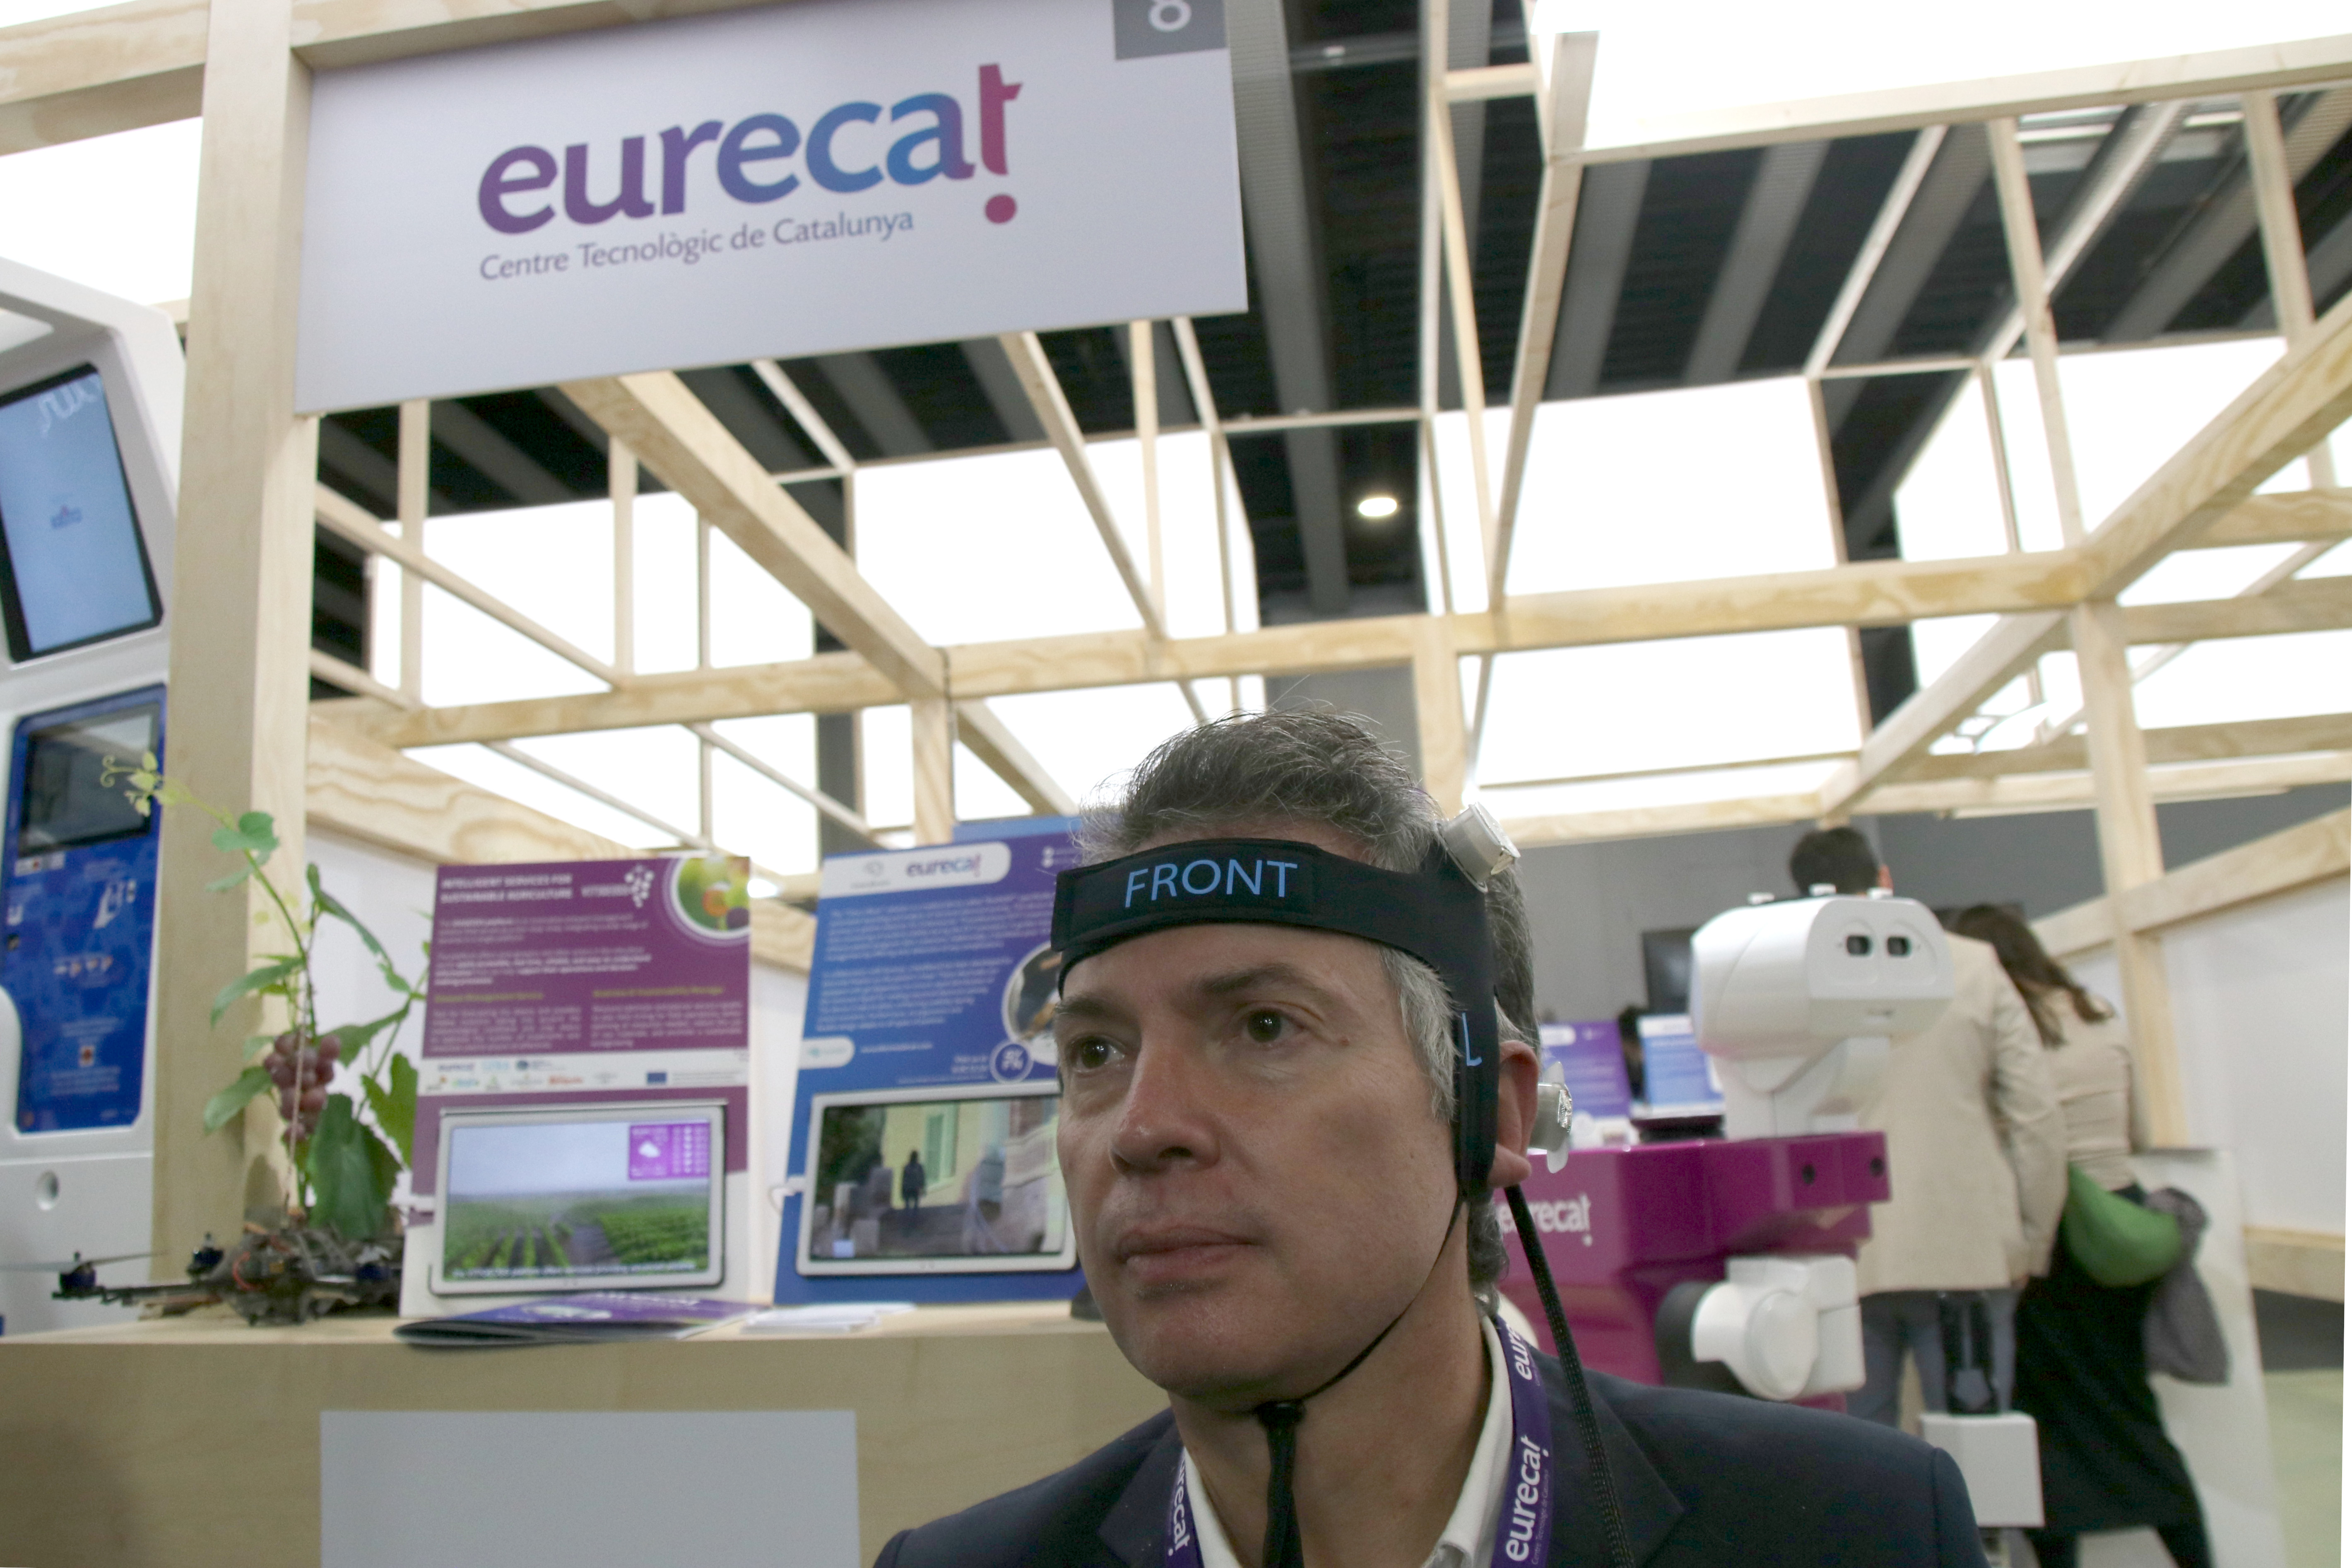 A representative of Eurecat shows off his company's headband designed to collect brainwave data of stroke patients